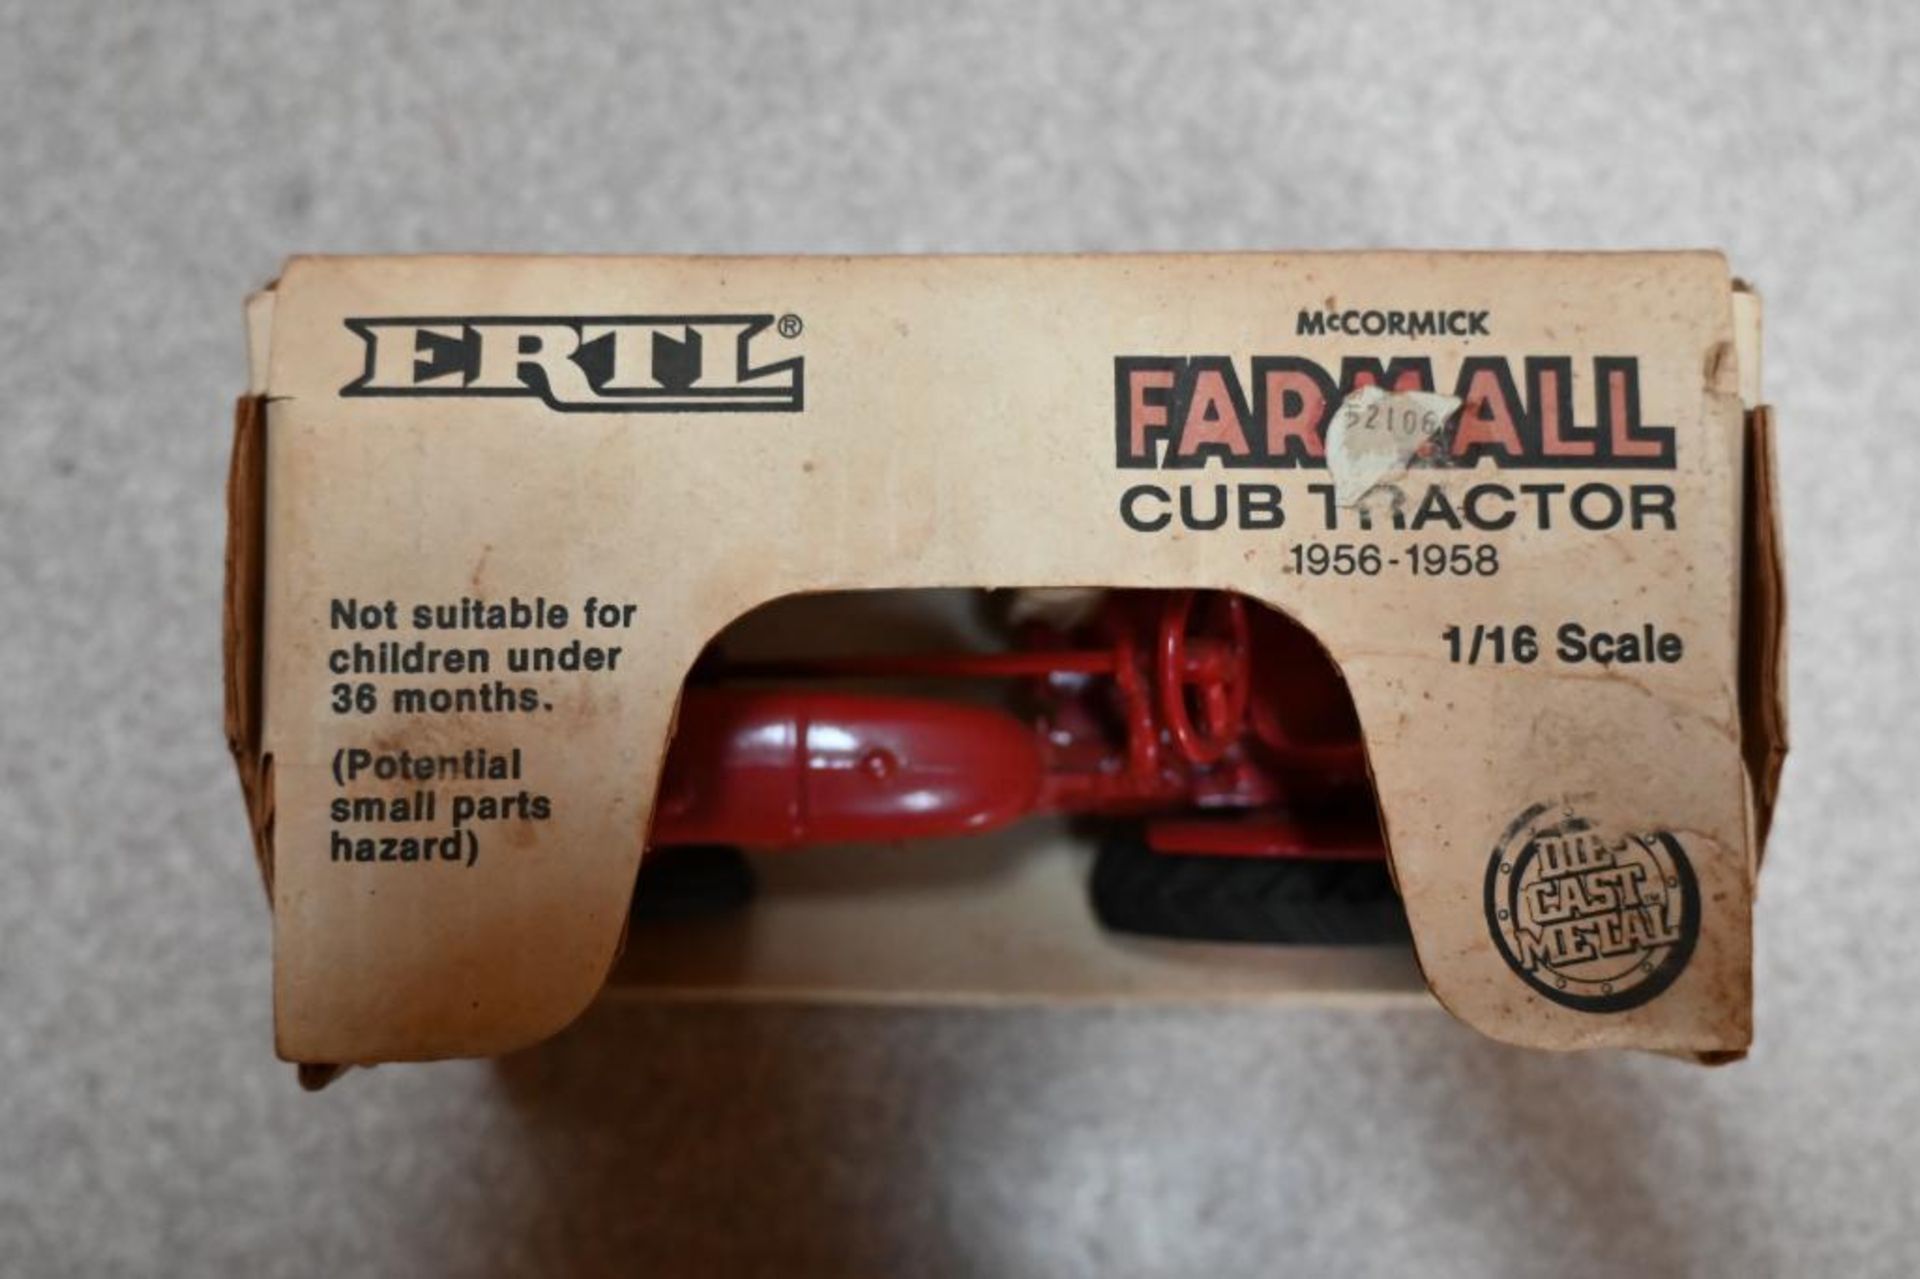 1/16 Scale Die Cast Metal Farmall Cub Tractor - Image 3 of 3